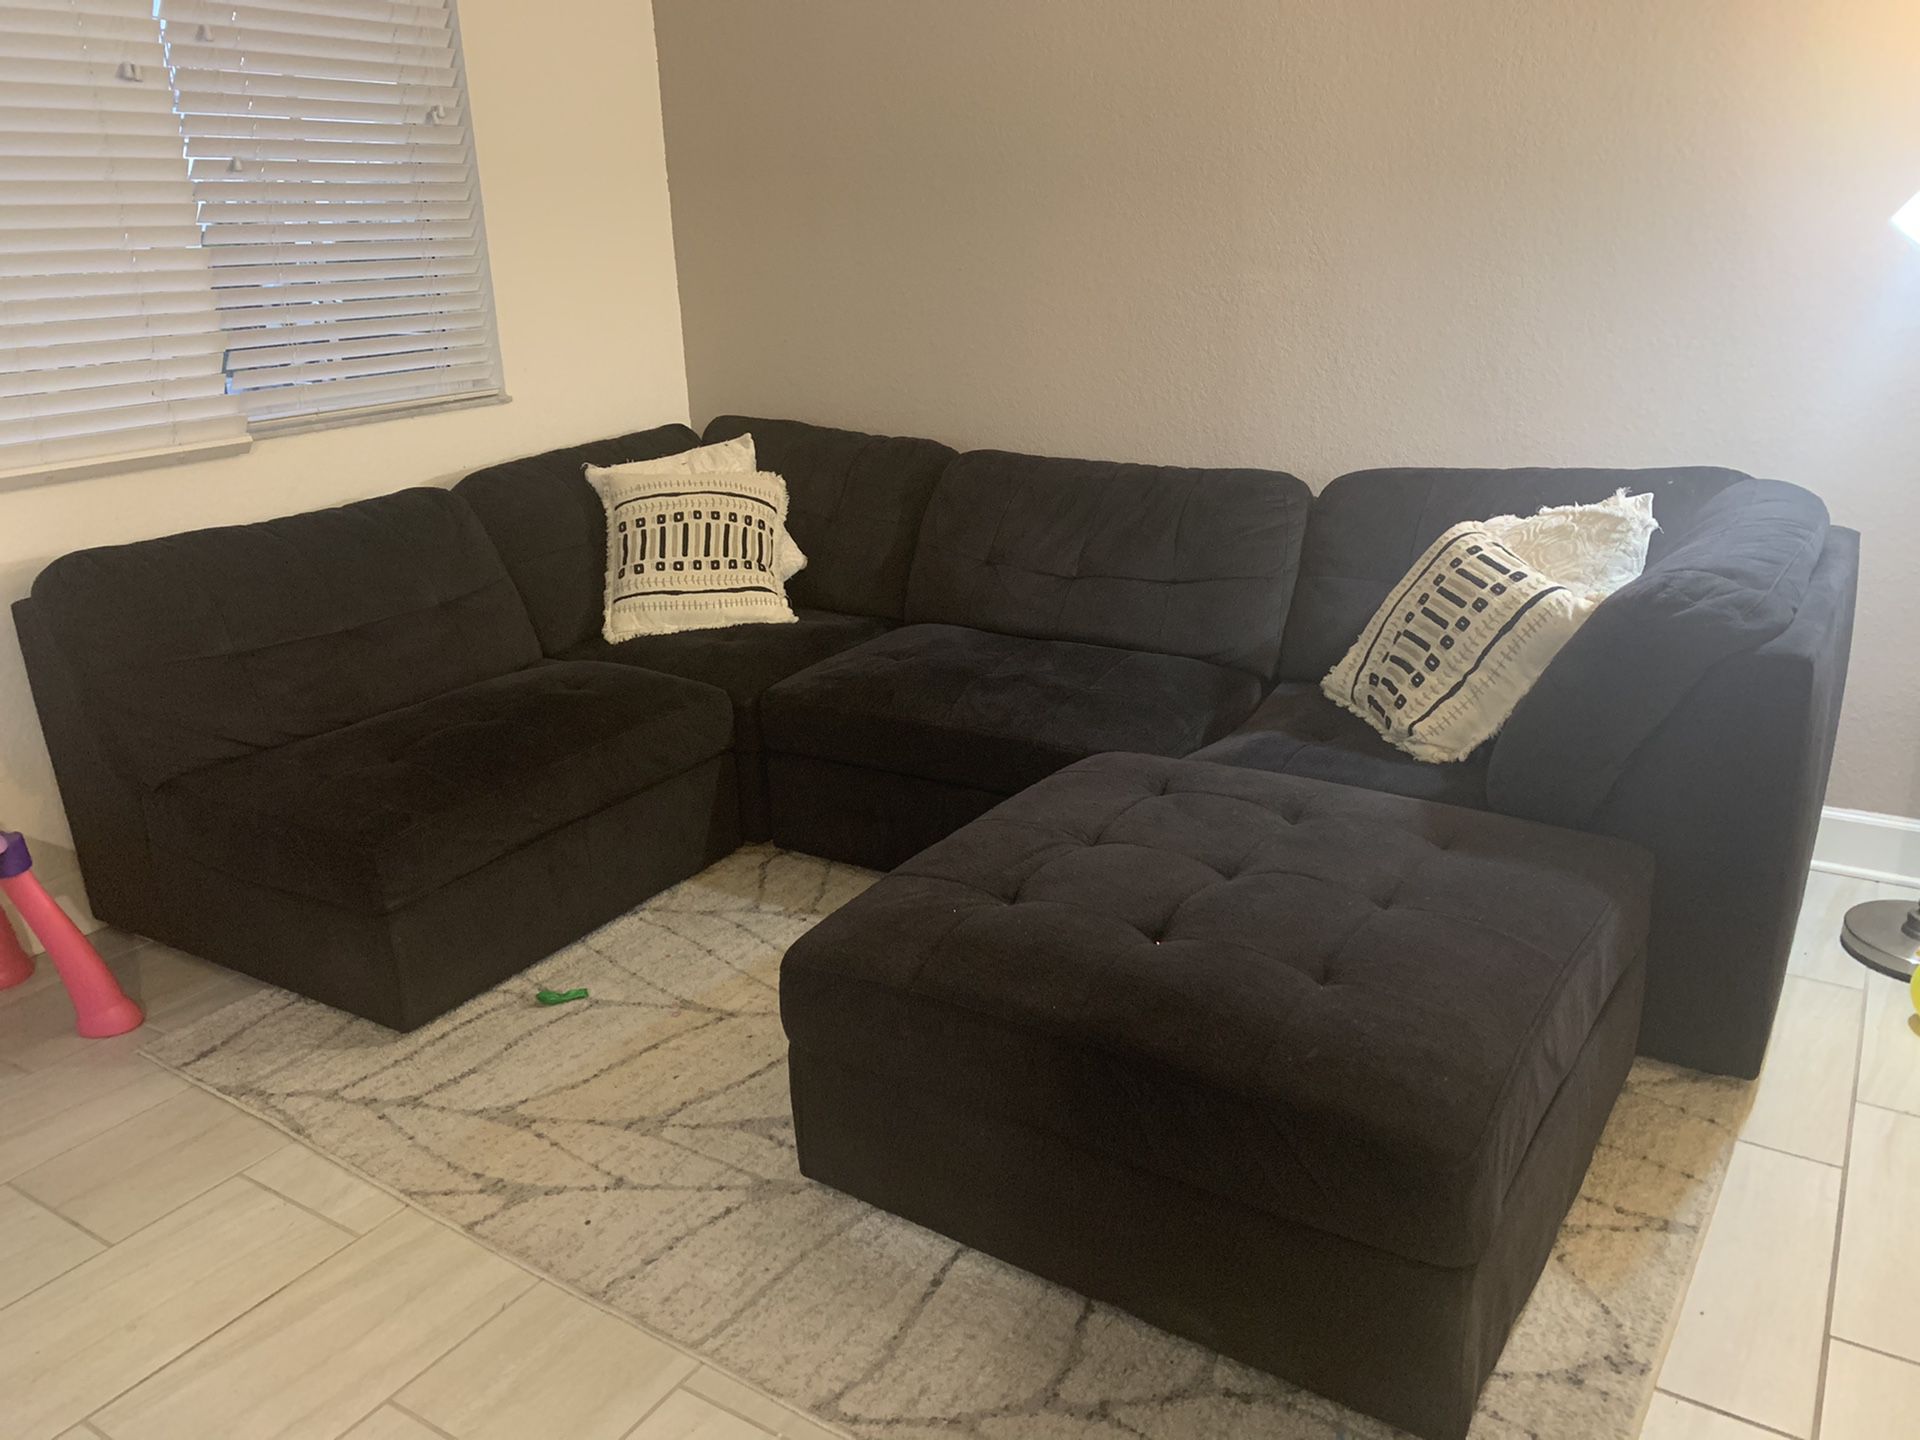 Dark blue/ black sectional couch